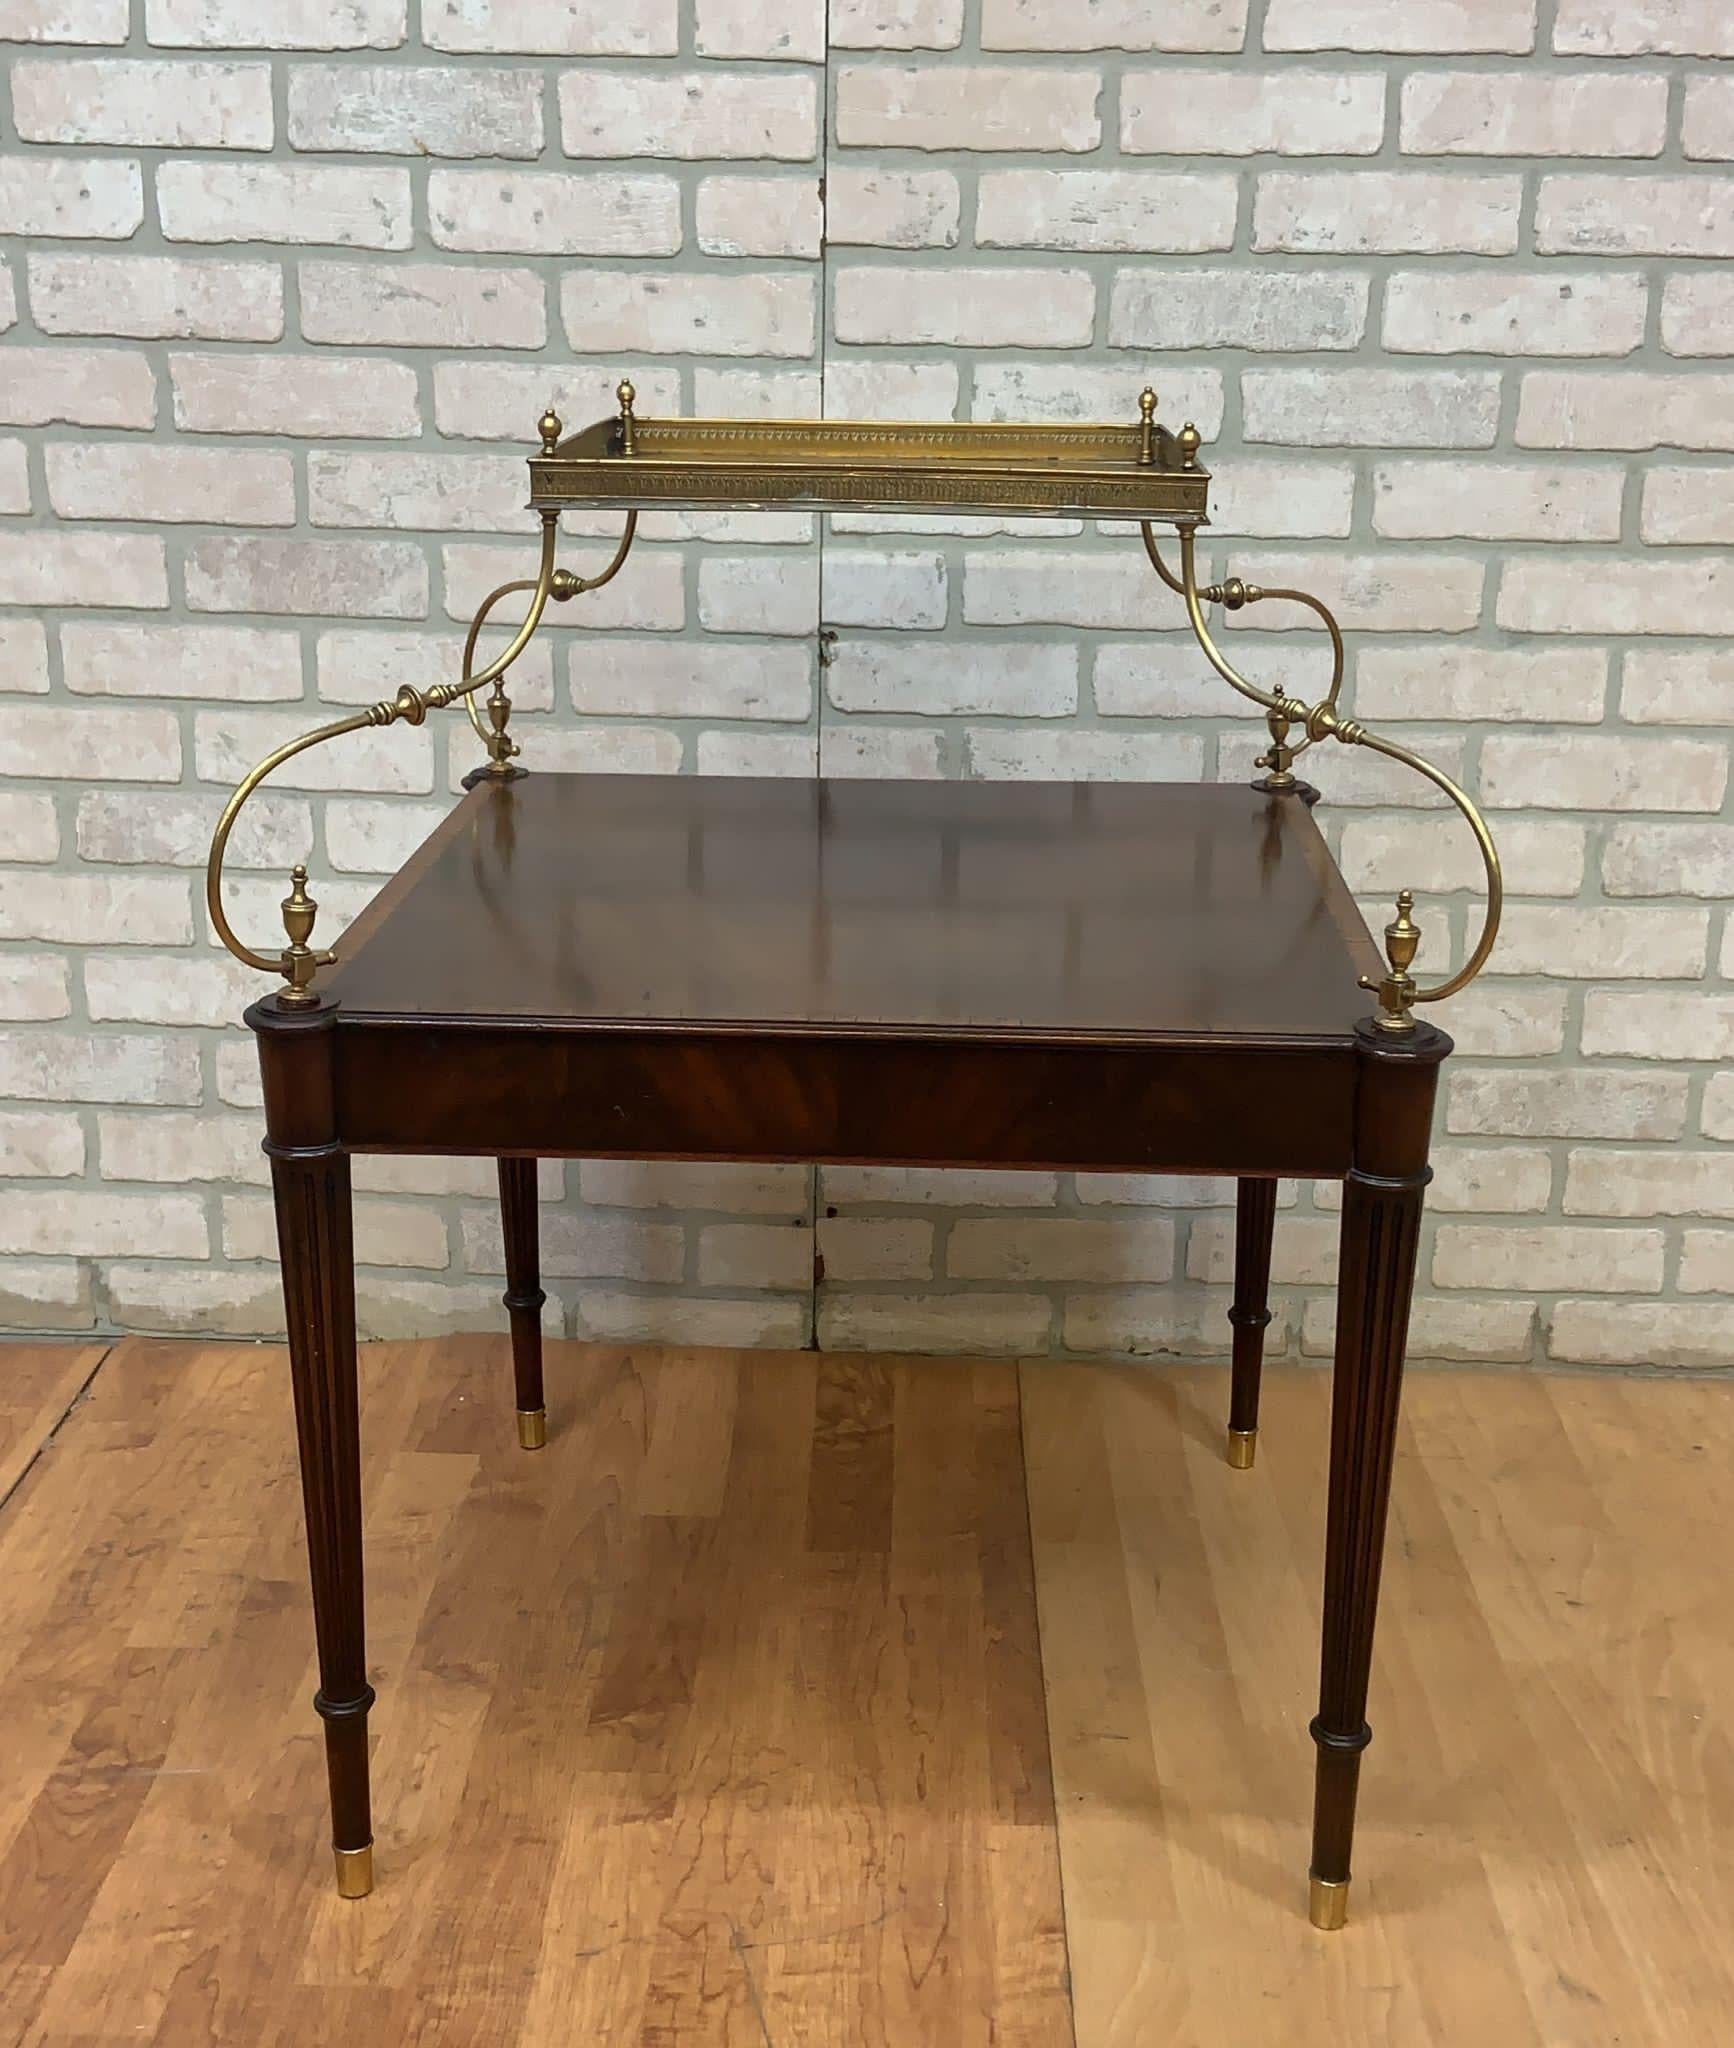 Antique Weiman Heirloom French Louis Brass Mounted Tray Top Single Drawer Table In Good Condition For Sale In Chicago, IL